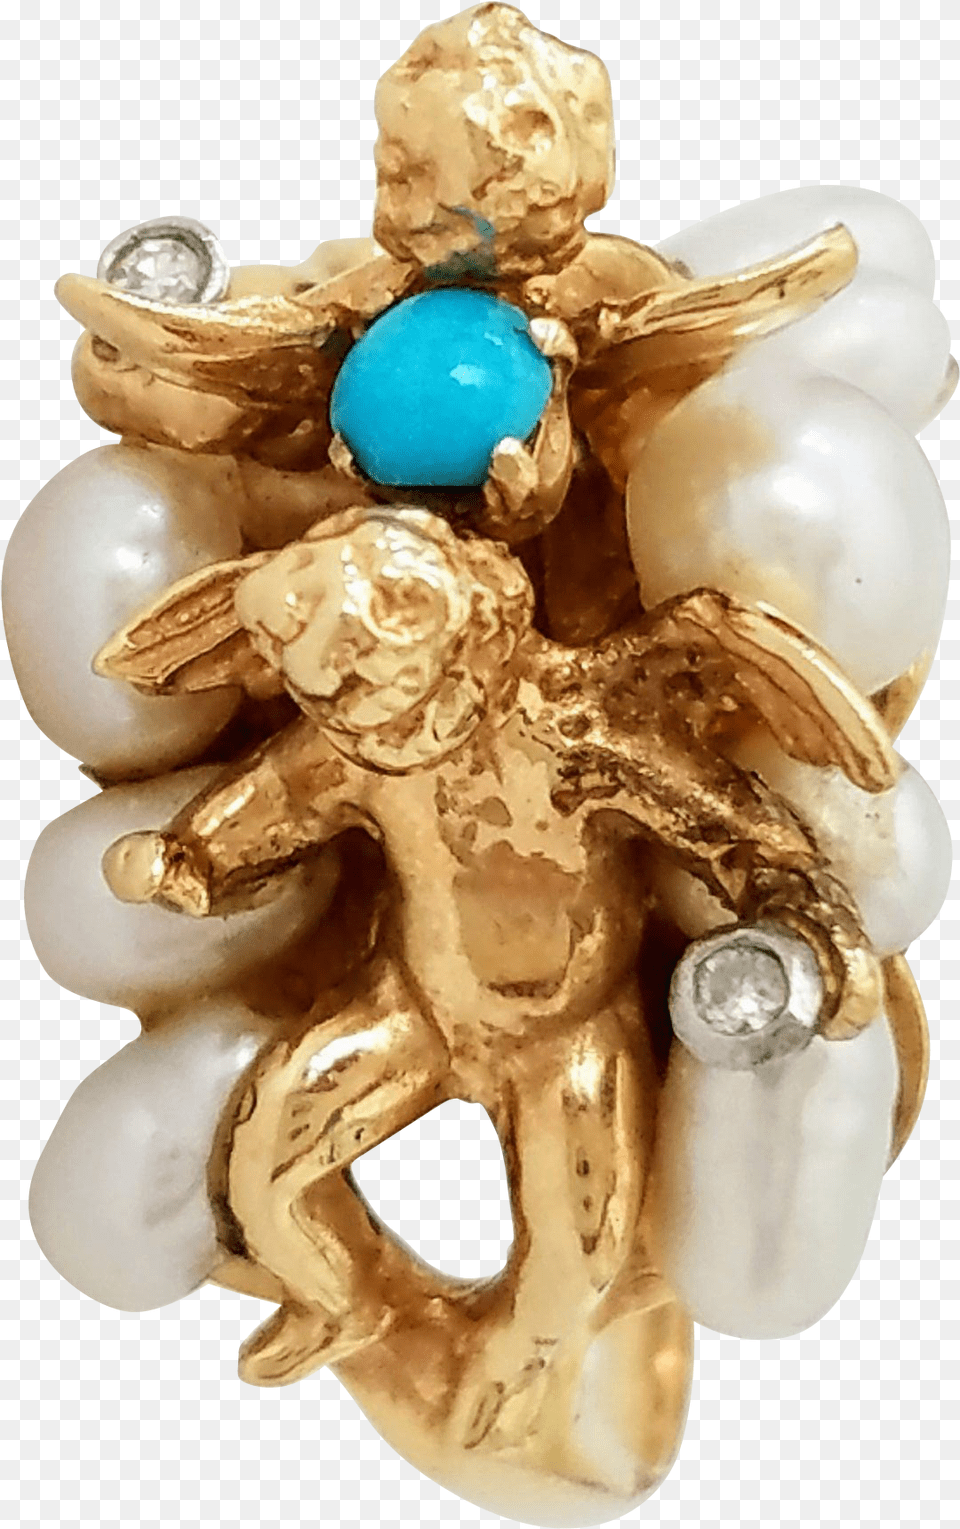 Angel Ring Opal, Accessories, Jewelry, Gemstone, Cream Png Image